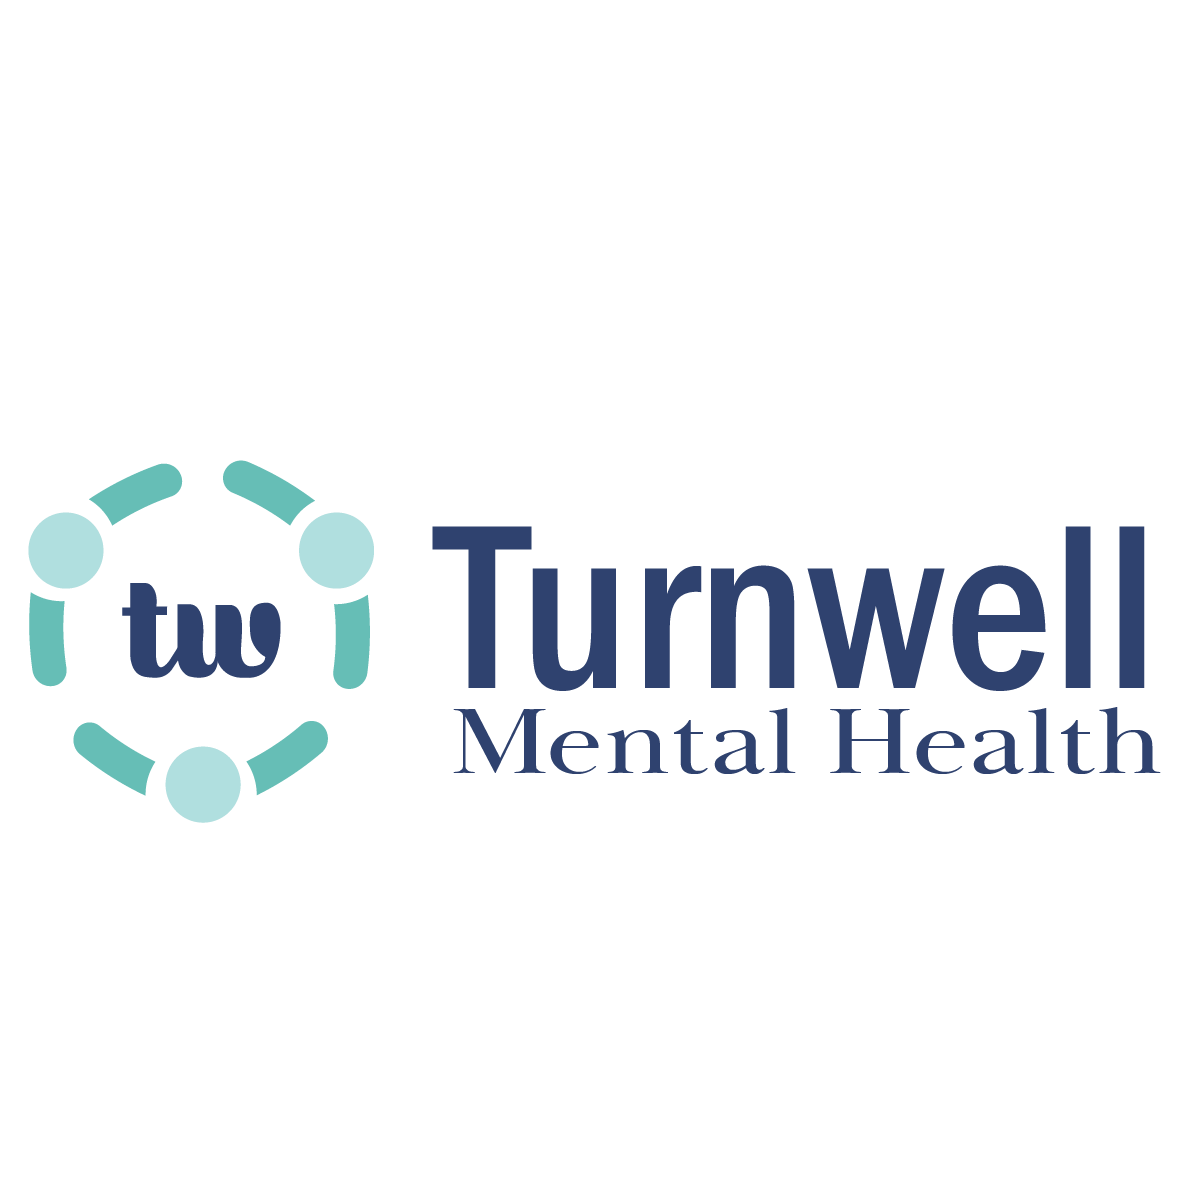 Turnwell Mental Health expands into South Carolina with new location